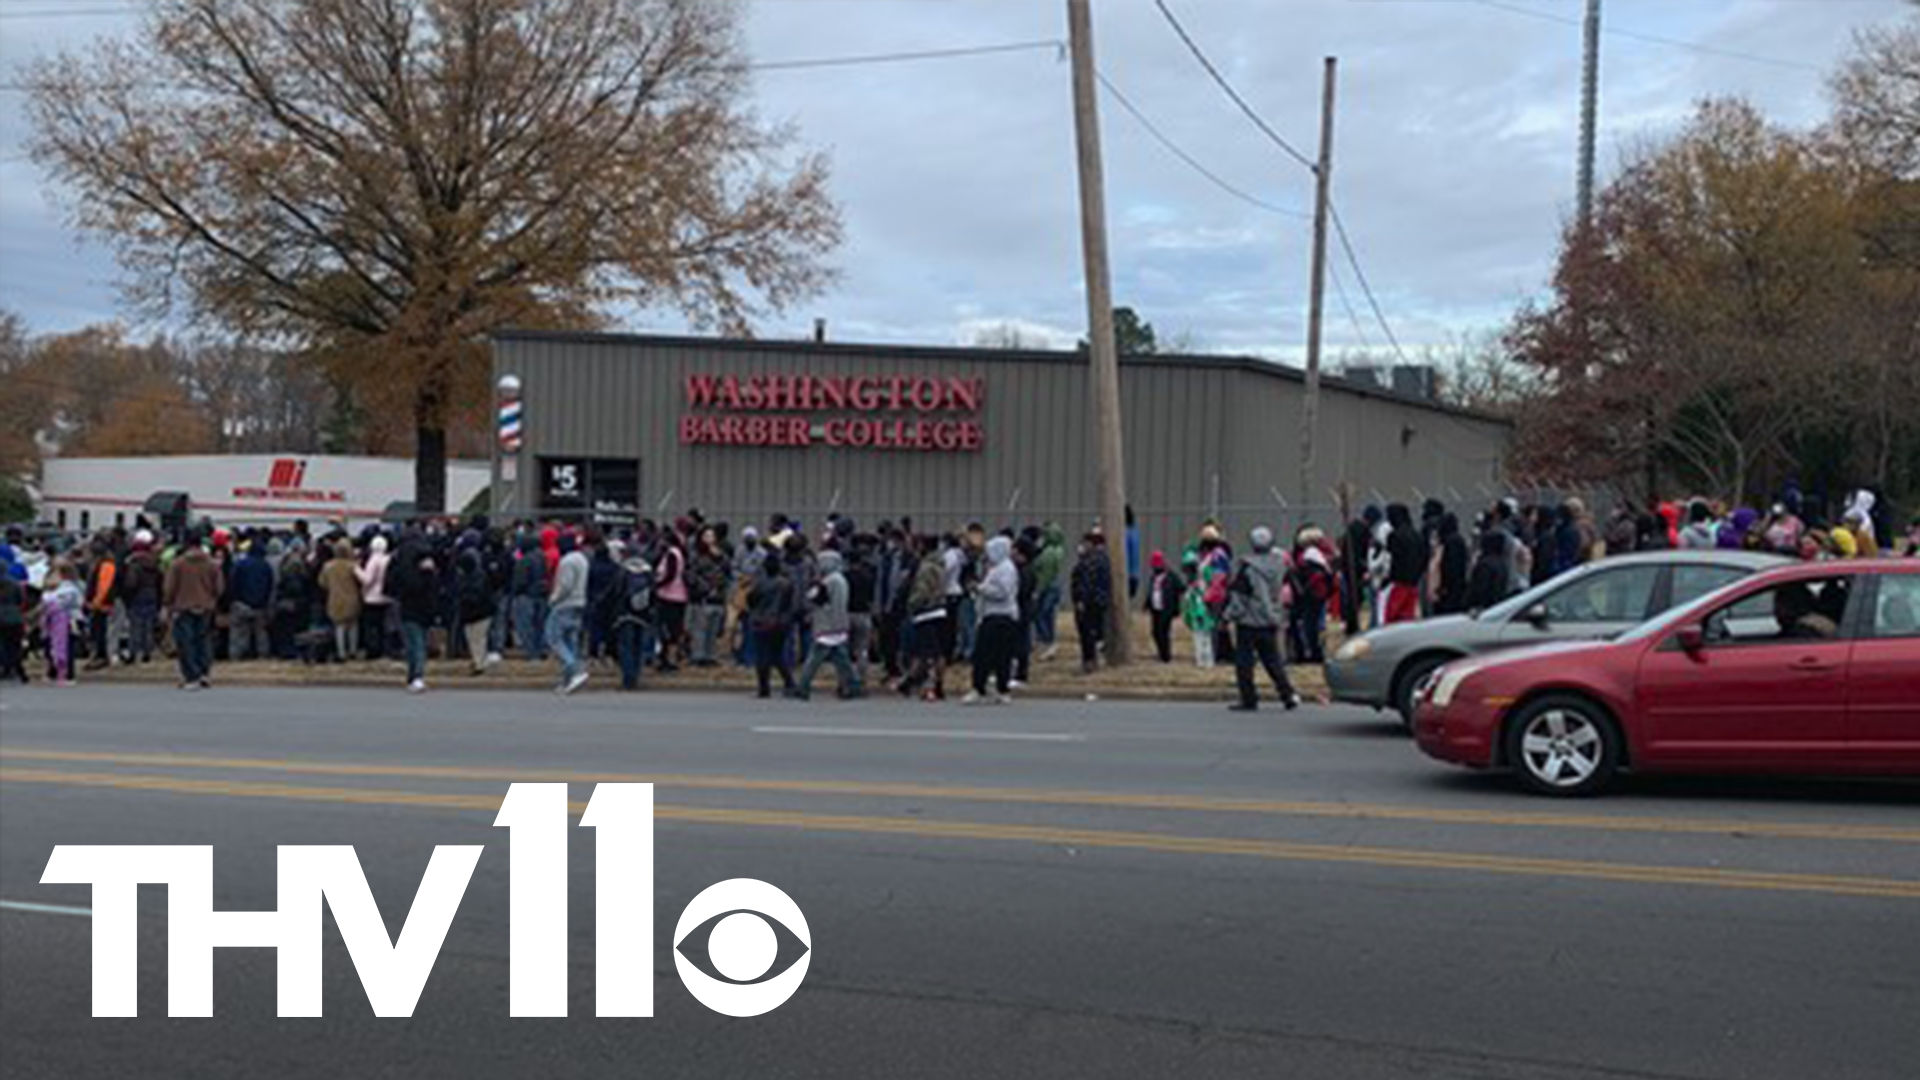 Hundreds of people gathered around the Washington Barber College on 65th Street after hearing that CARES Act money was being distributed in the amount of $850.